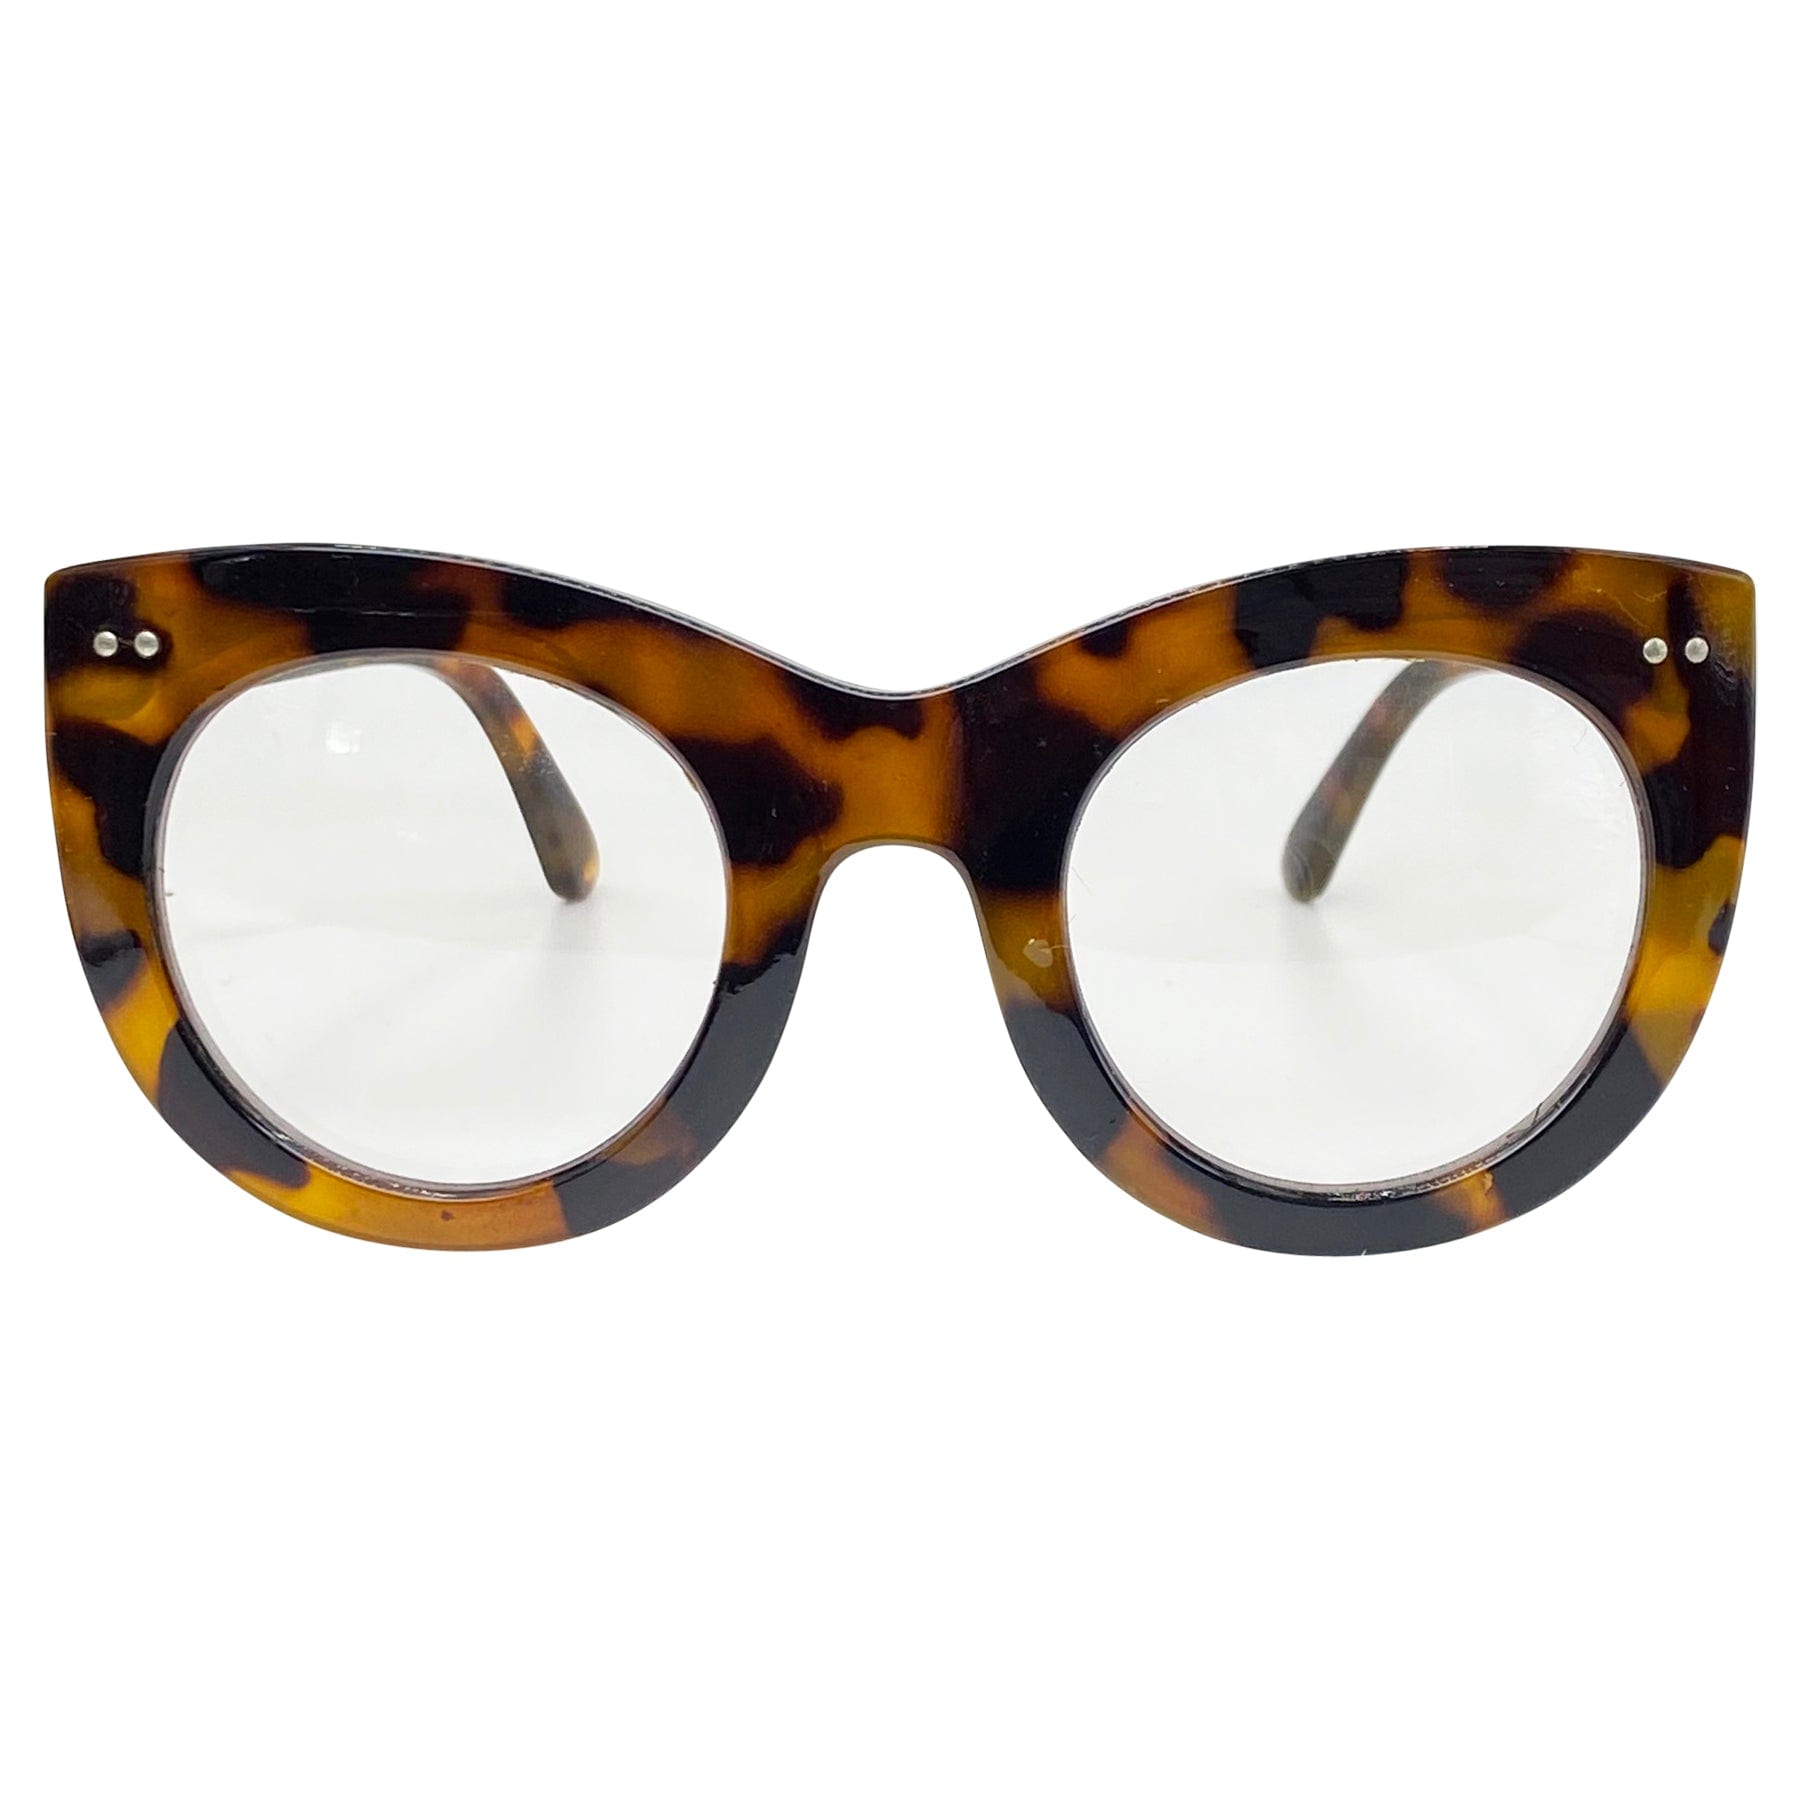 vintage inspired frame with a rounded cat eye shape and clear lens